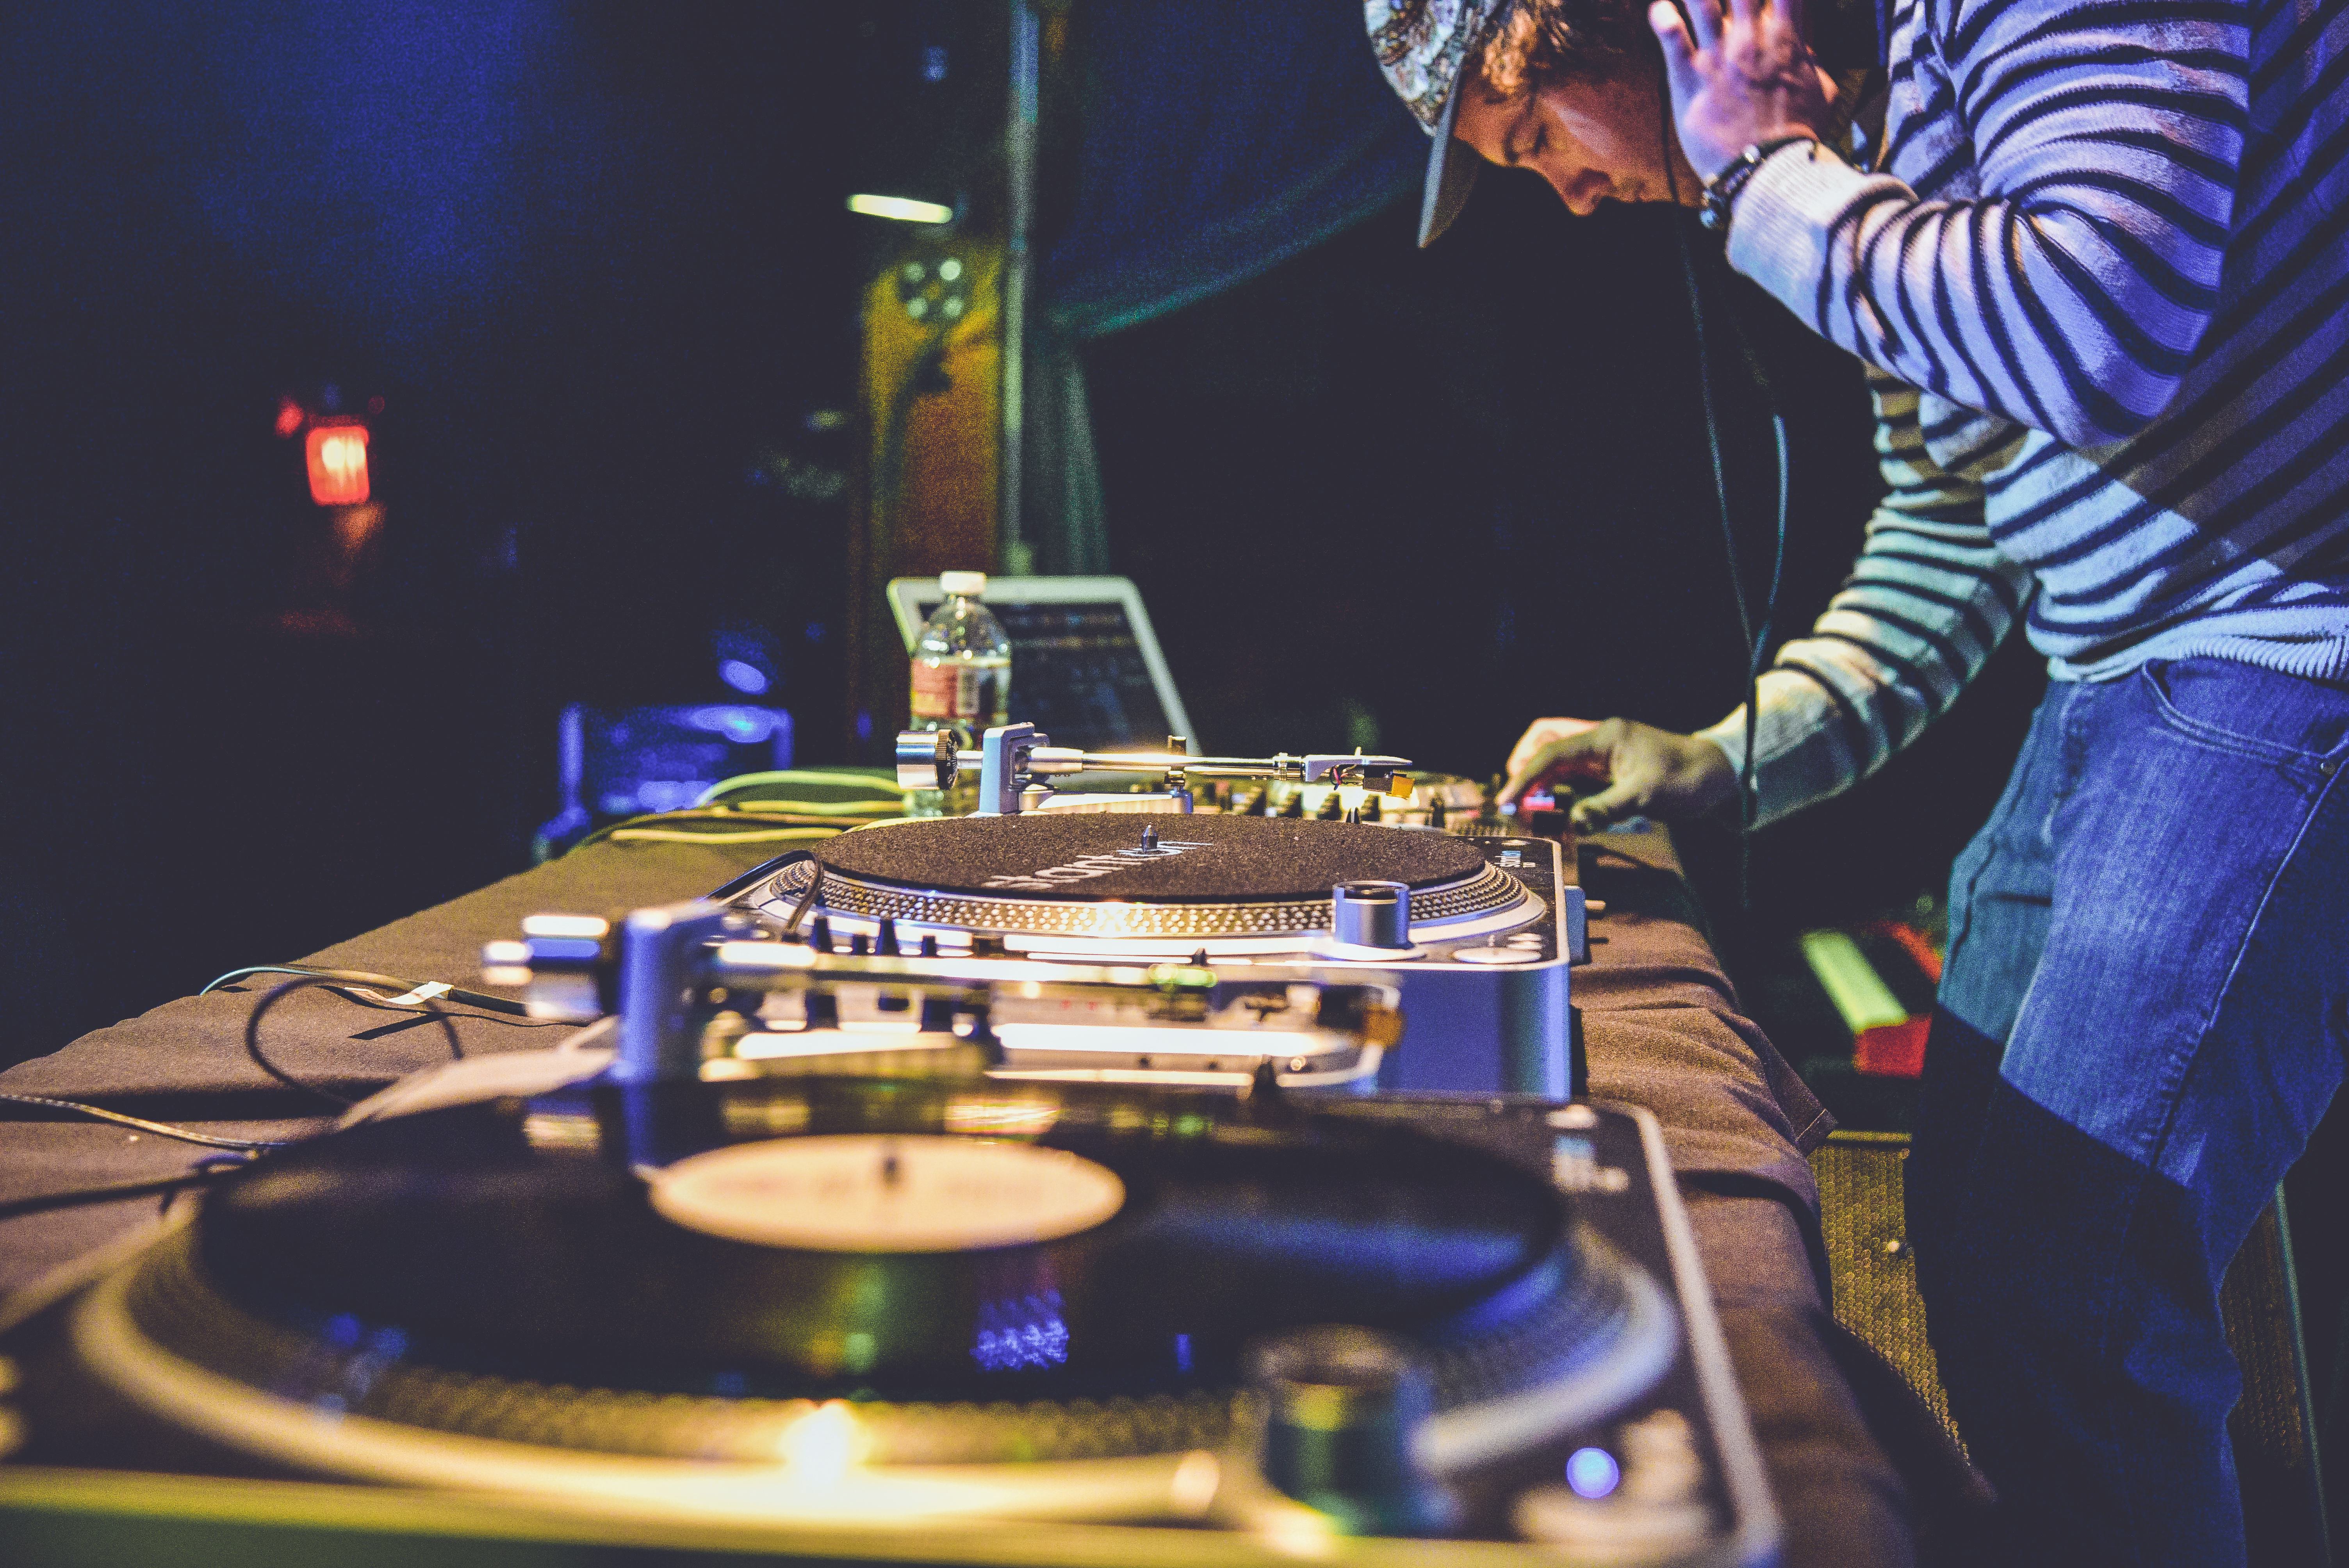 2. Learning from Other DJ Visual Styles